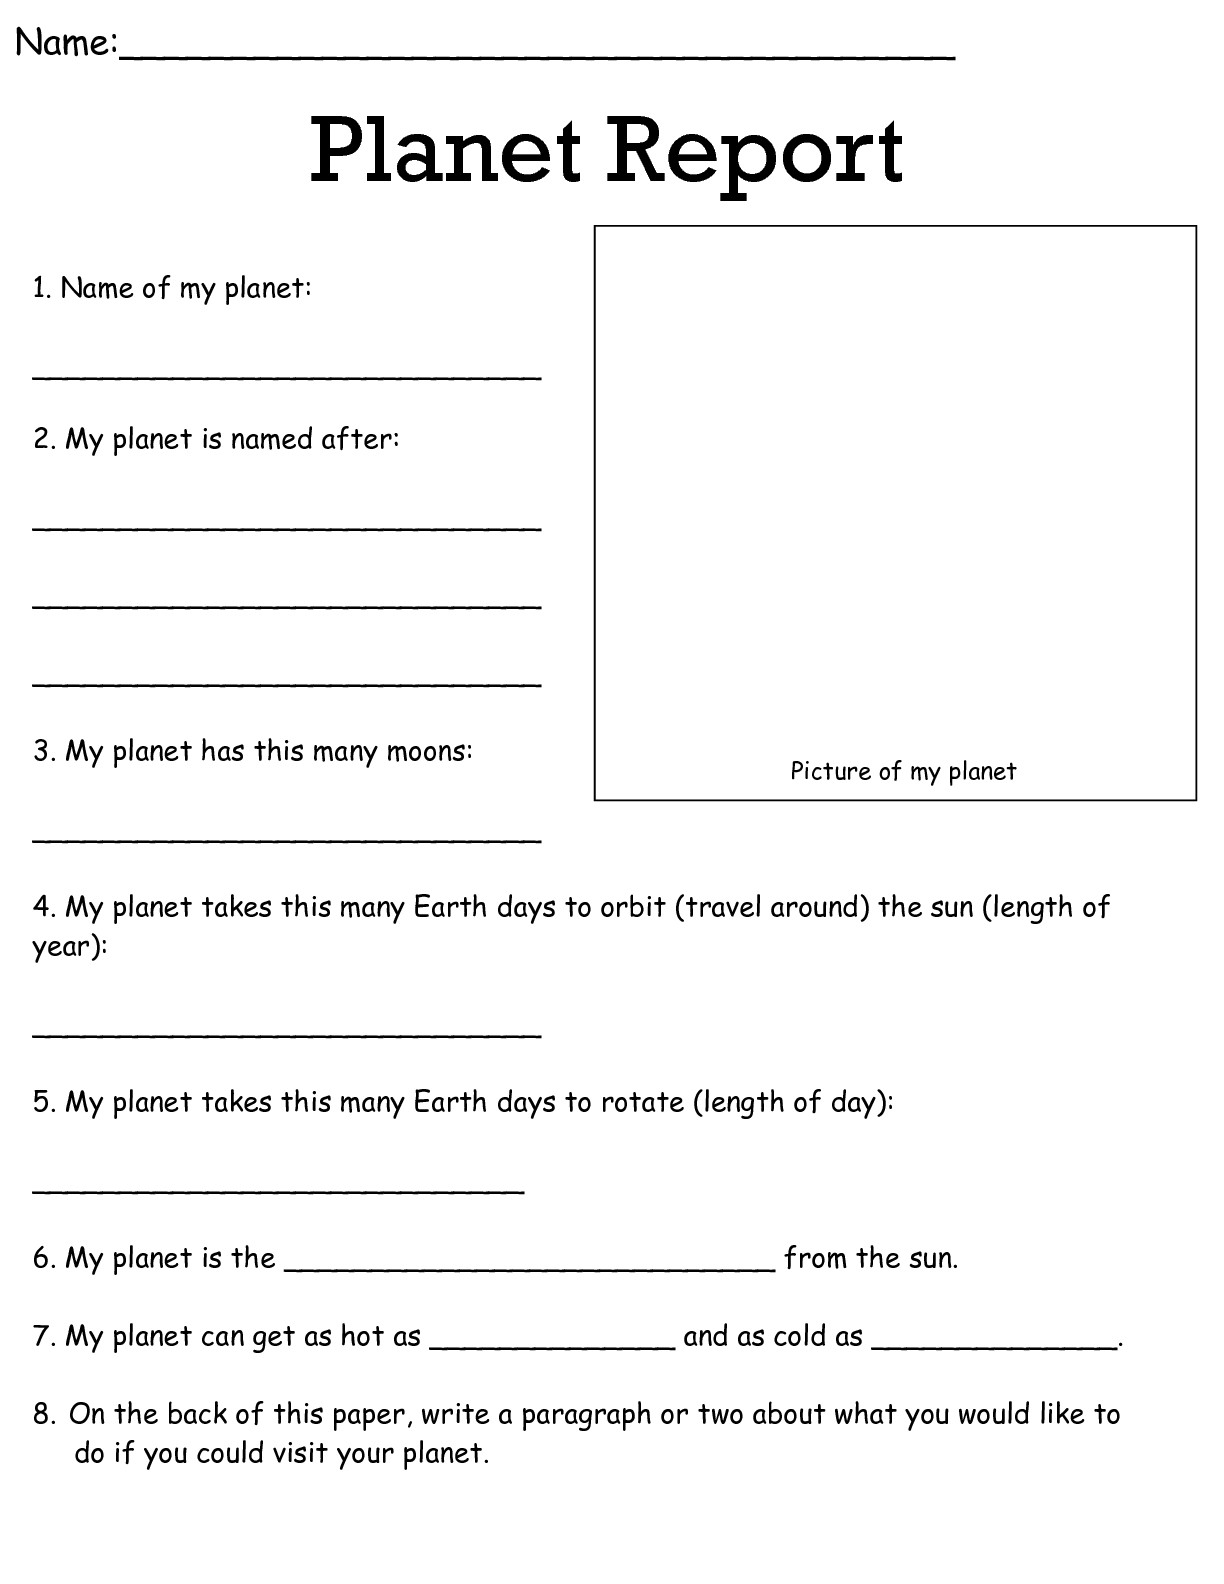 Printables What Is Science Worksheet science worksheets and printouts from the teachers guide planet report form